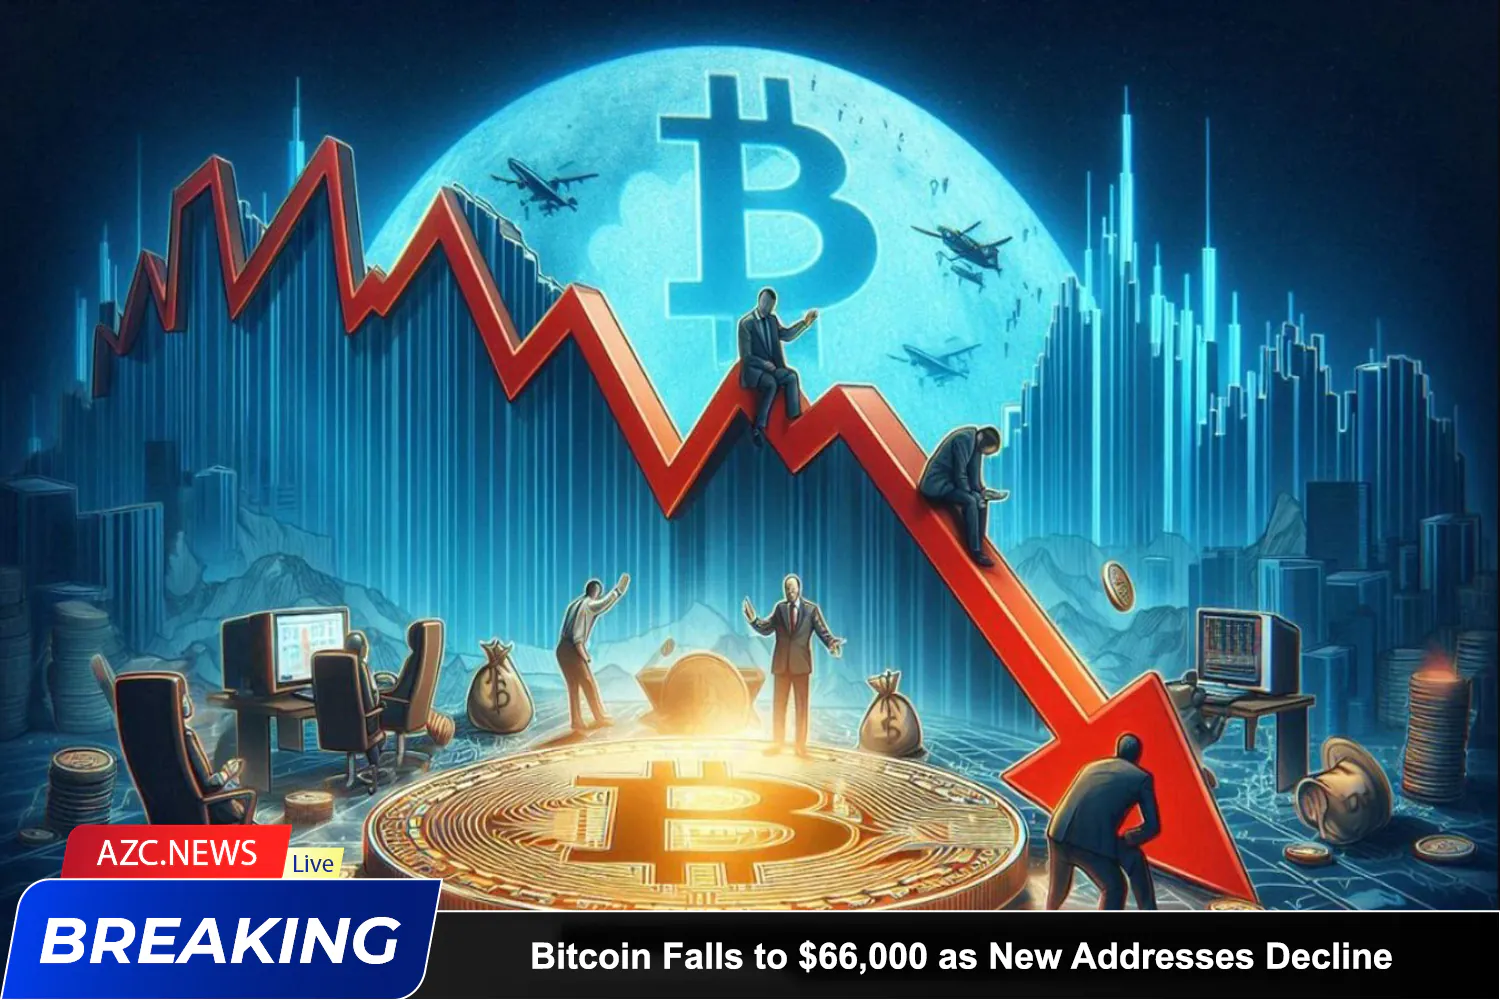 Azcnews Bitcoin Falls To $66,000 As New Addresses Decline